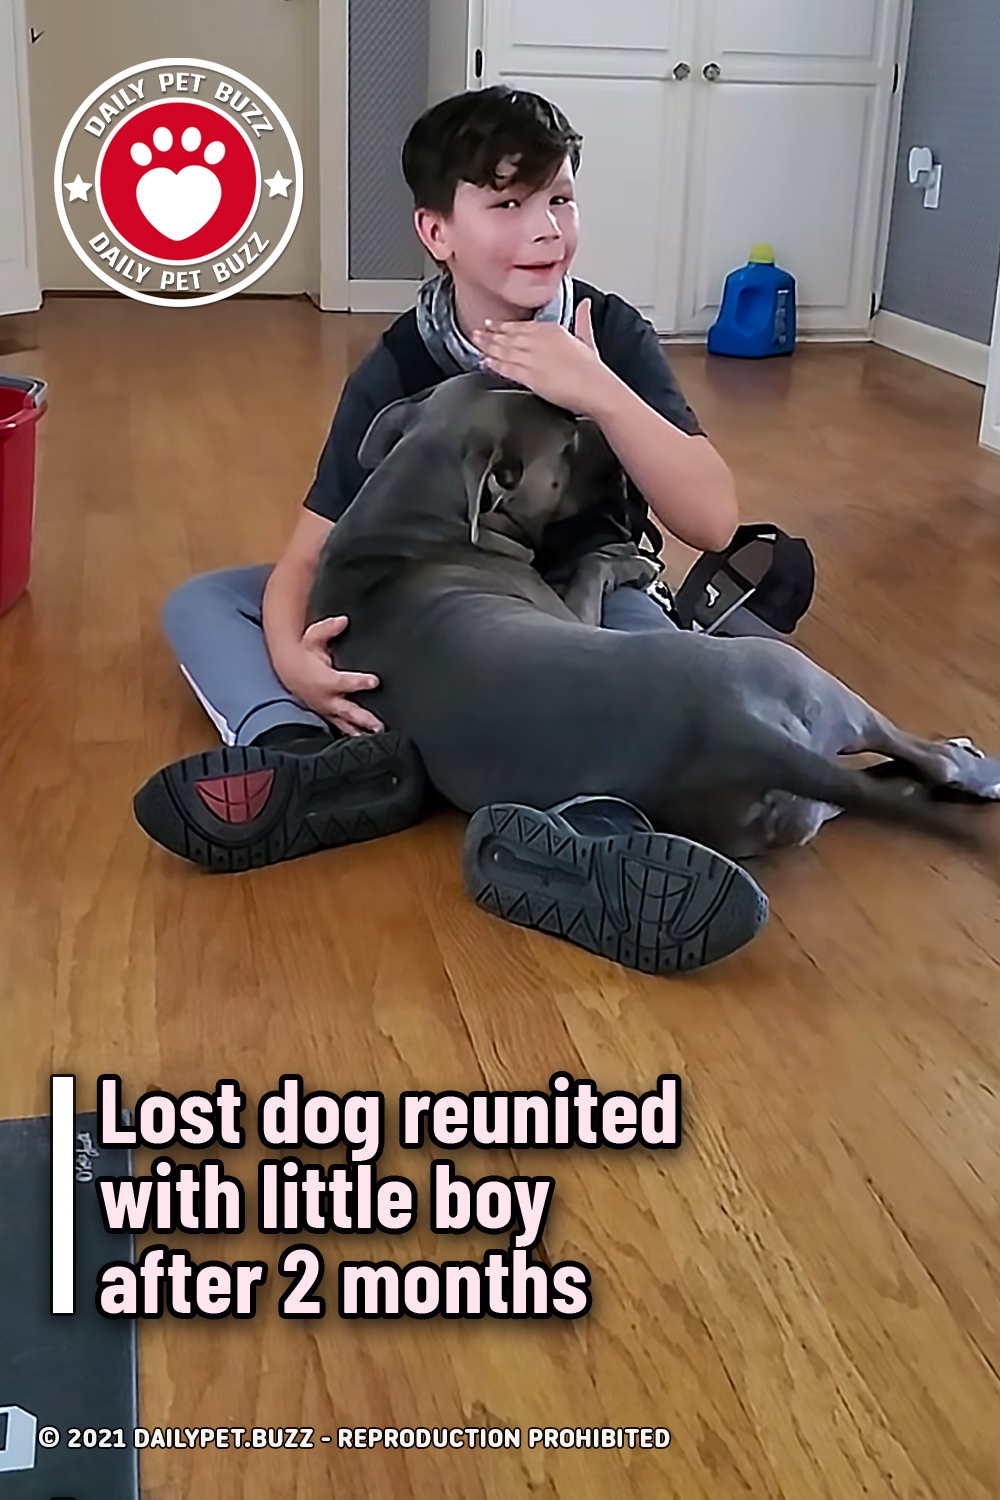 Lost dog reunited with little boy after 2 months